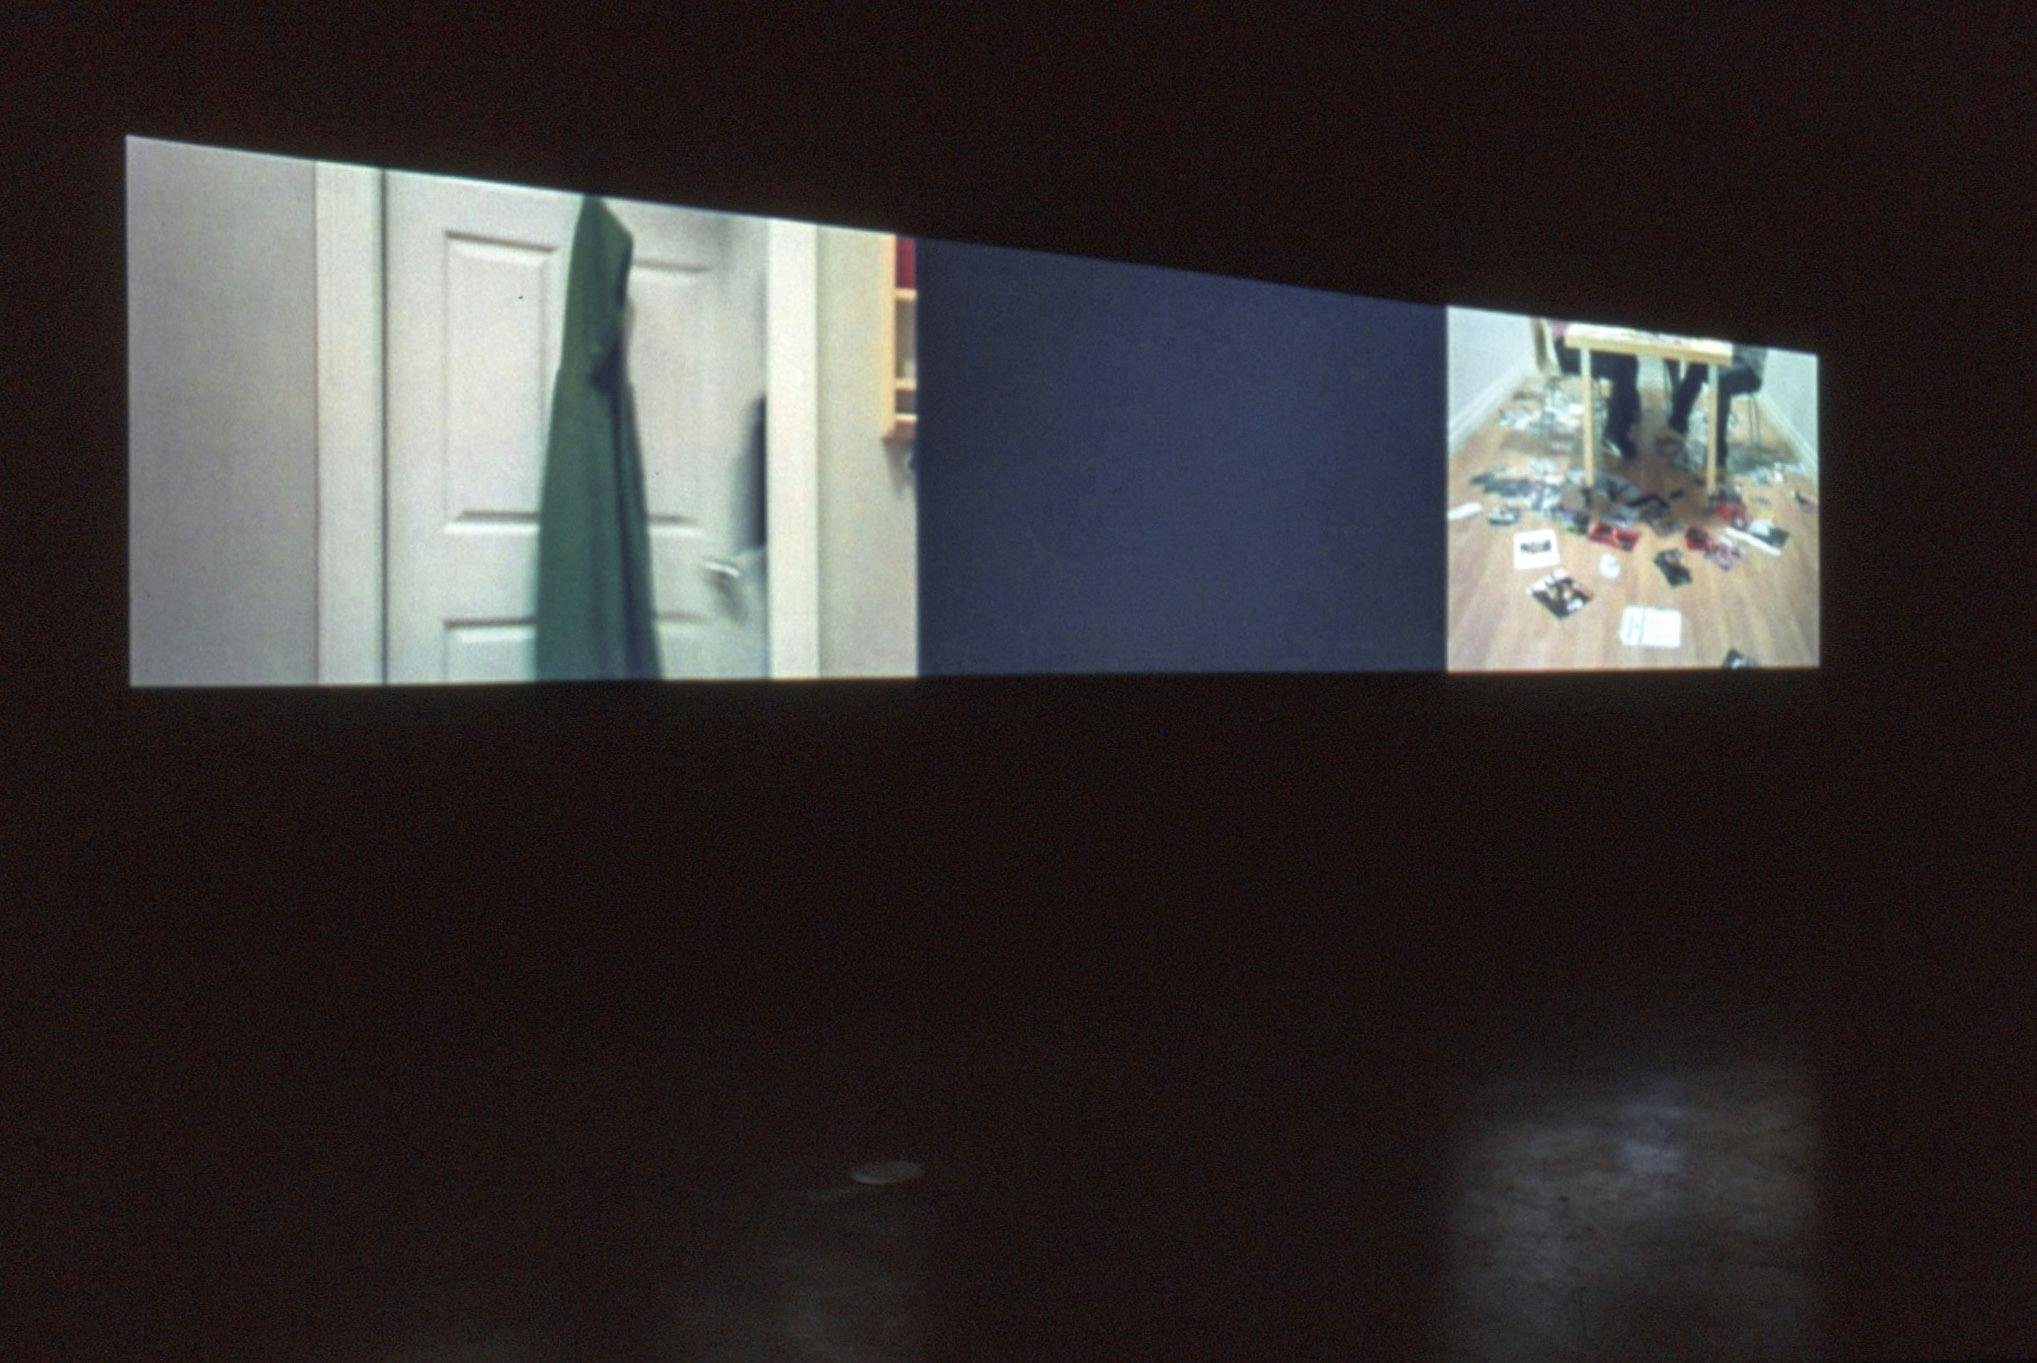 Installation image of a three-channel video by Alex Morrison. The middle video only shows a black screen. Two other videos show some images taken inside houses, including table chairs and a door. 